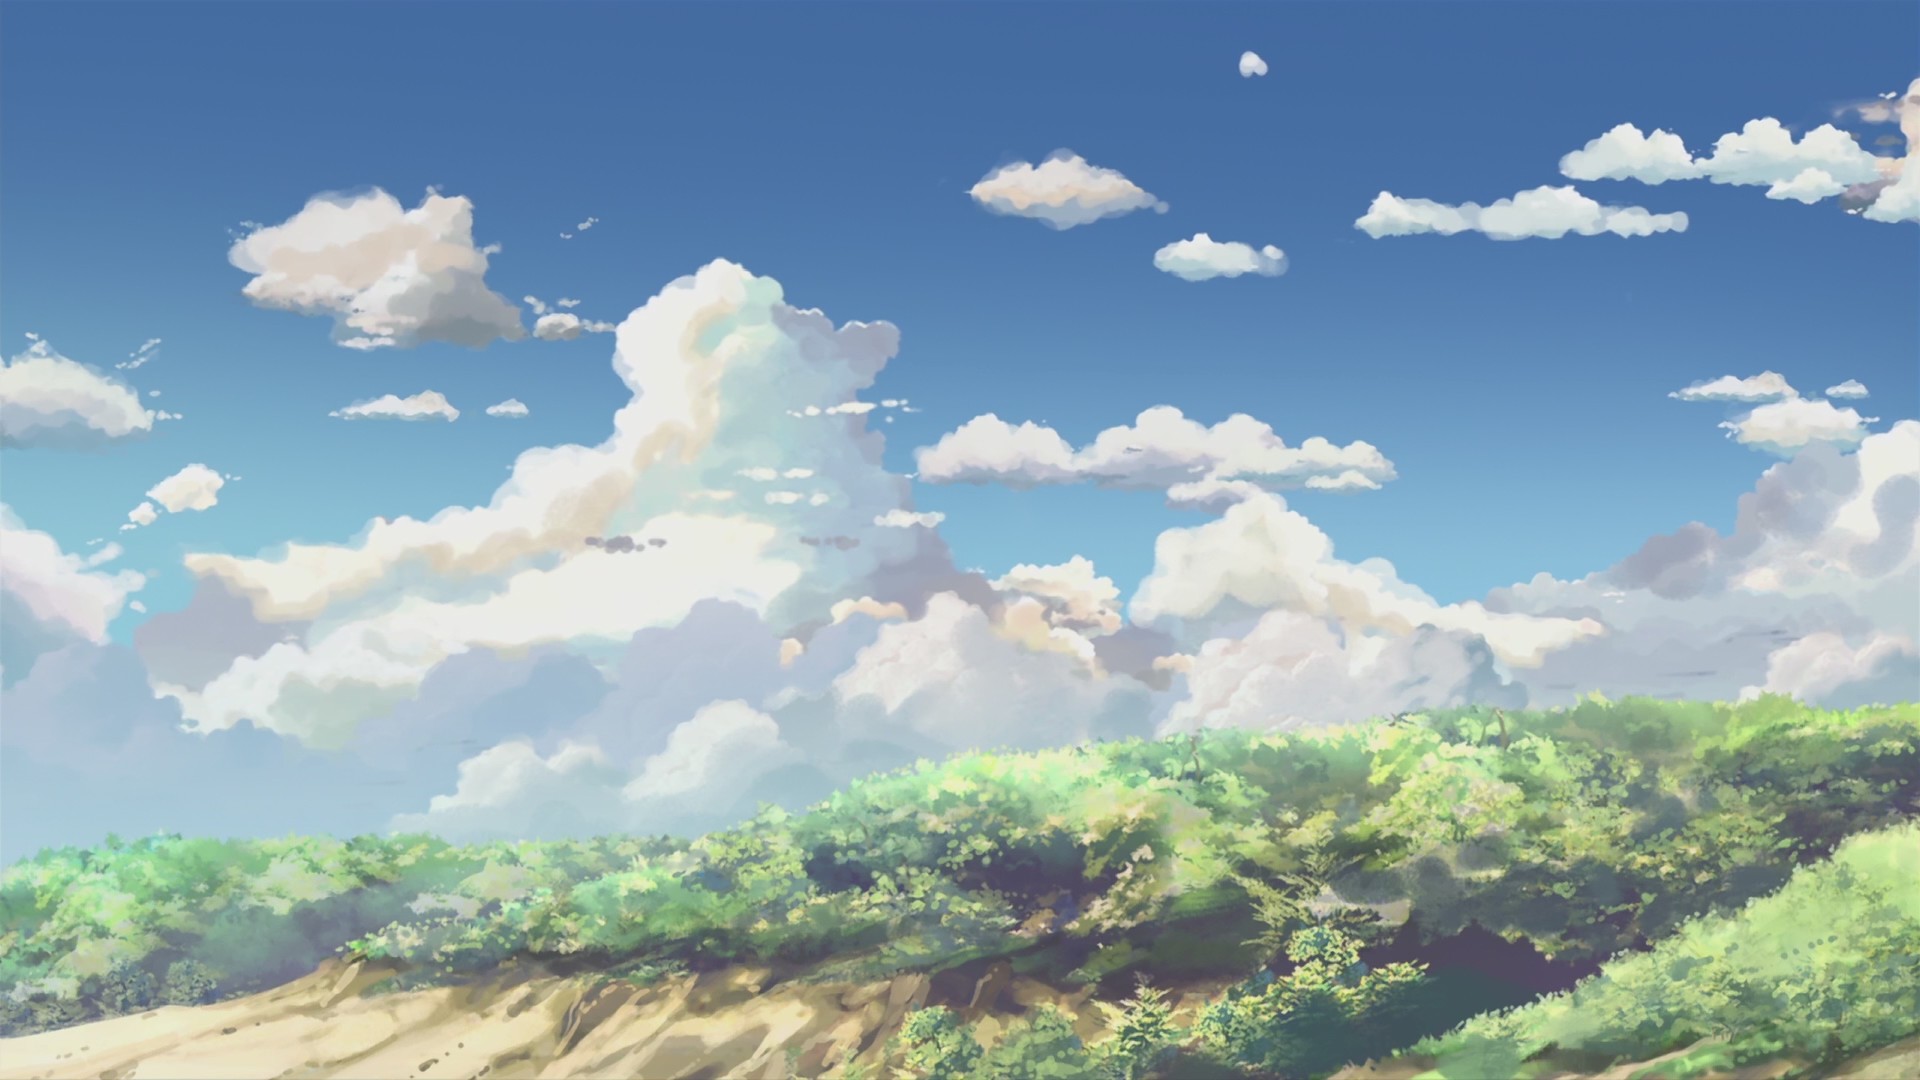 Anime 5 Centimeters Per Second 8k - Anime Scenery Background , HD Wallpaper & Backgrounds